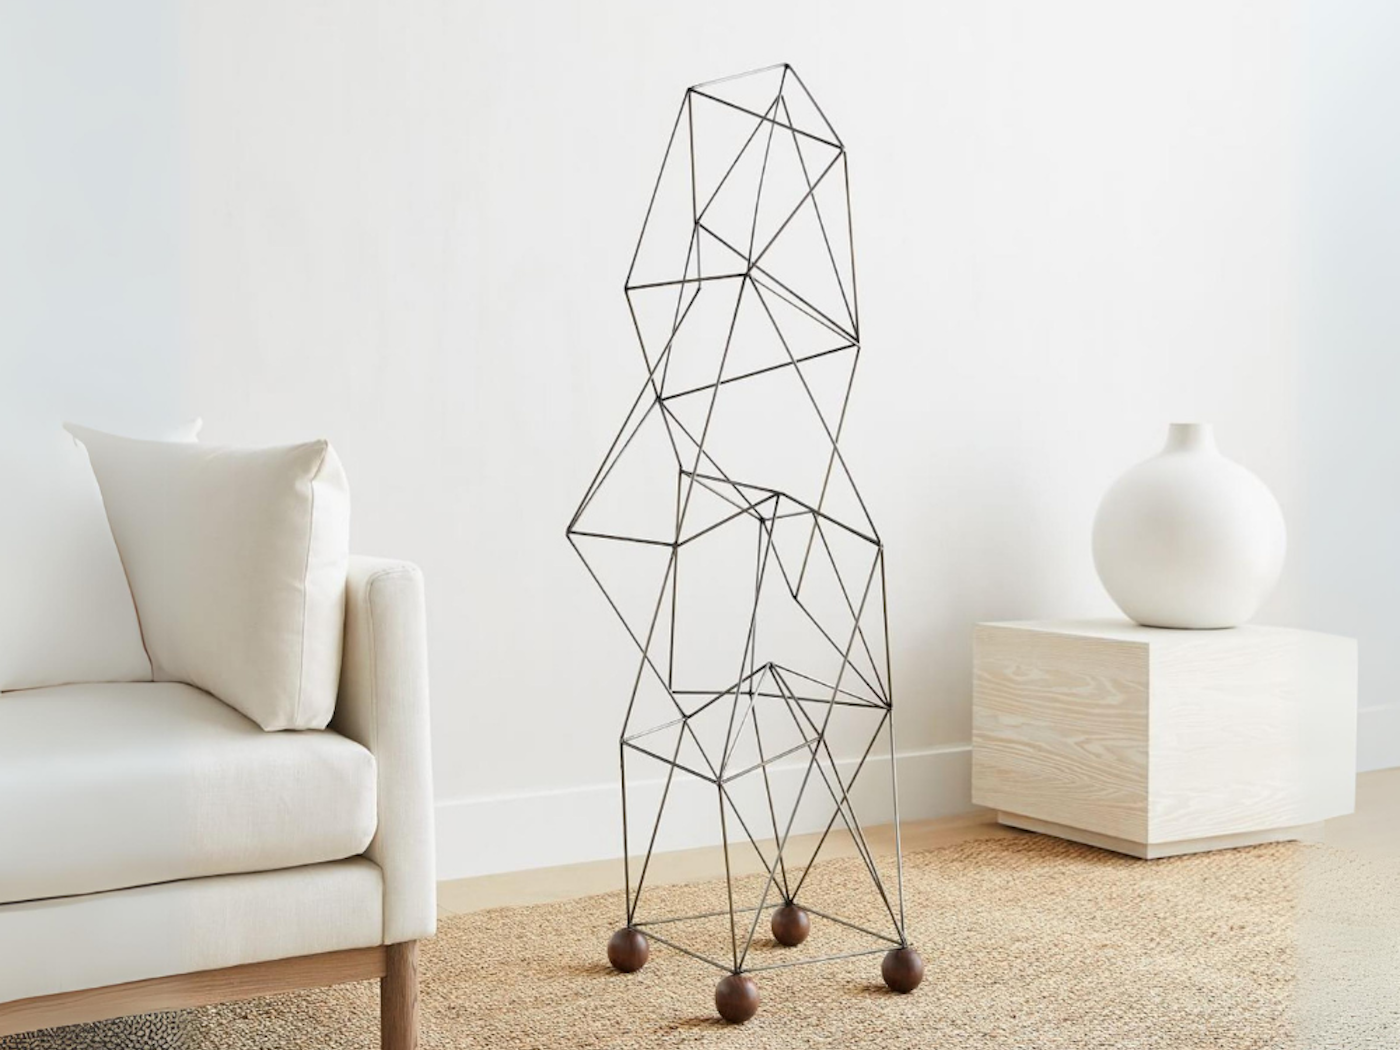 Diego Olivero floor sculptures are available from West Elm for £104.95.  